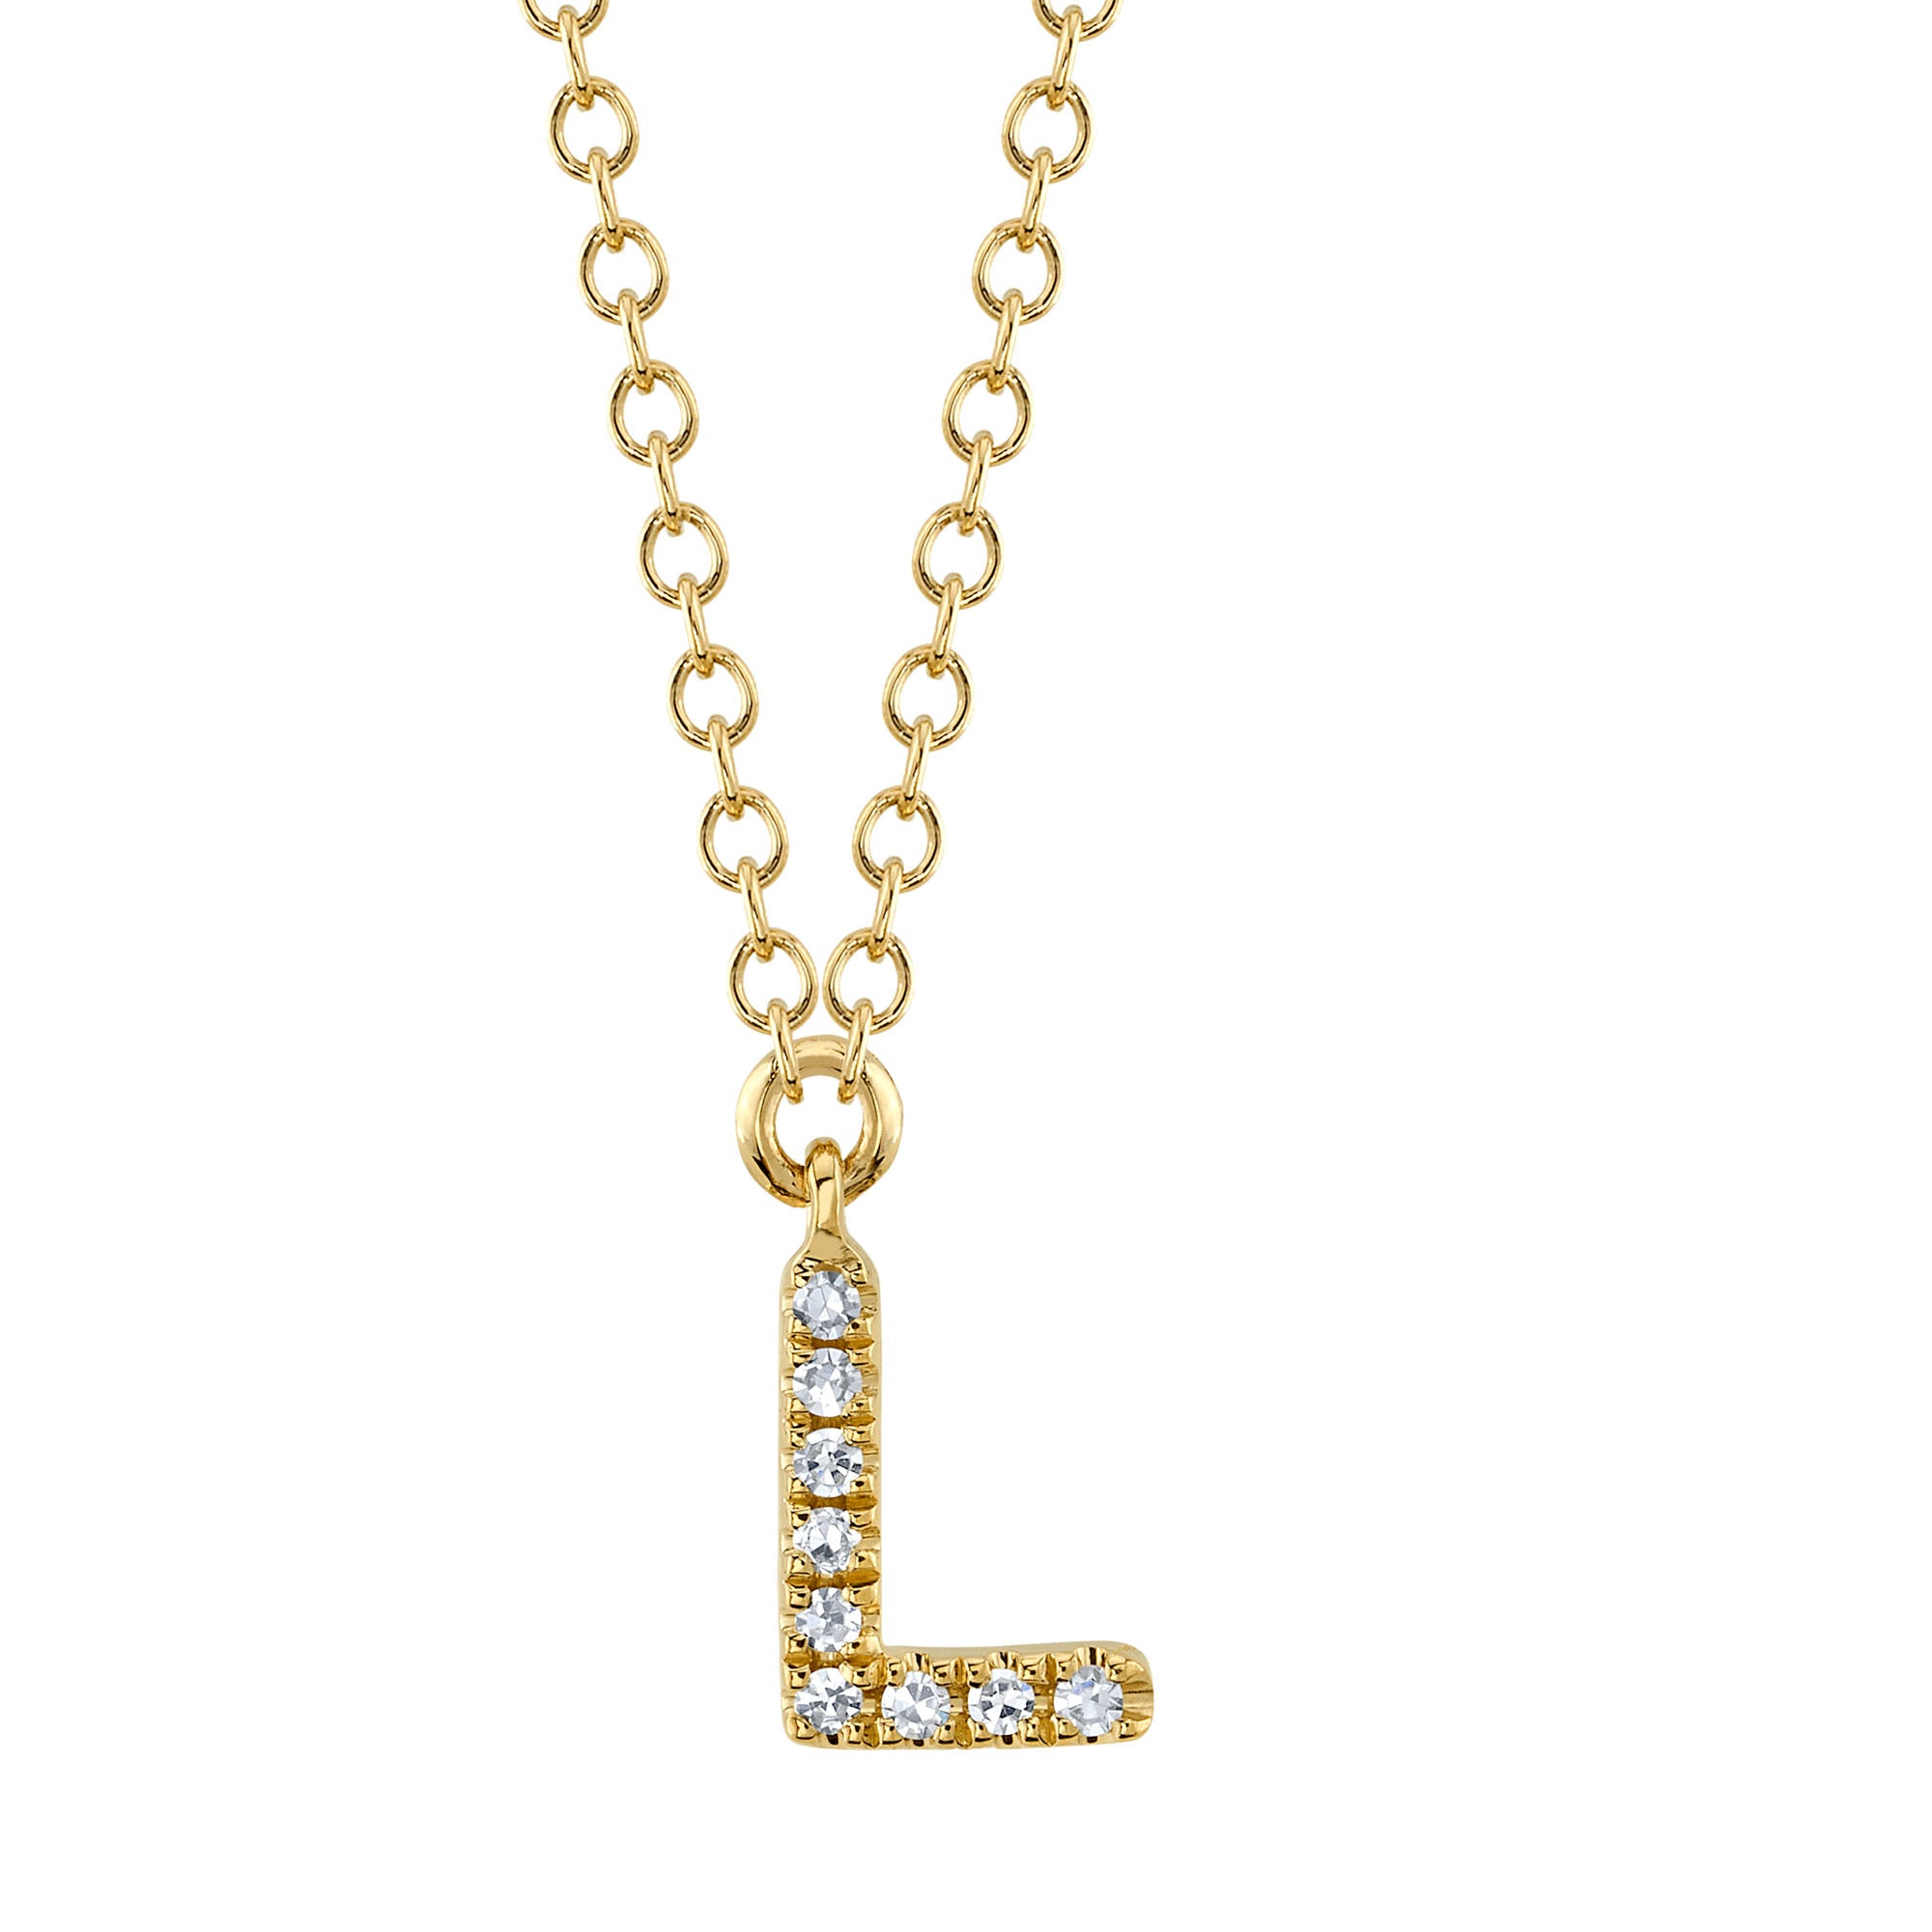 Diamond Initial Necklace A